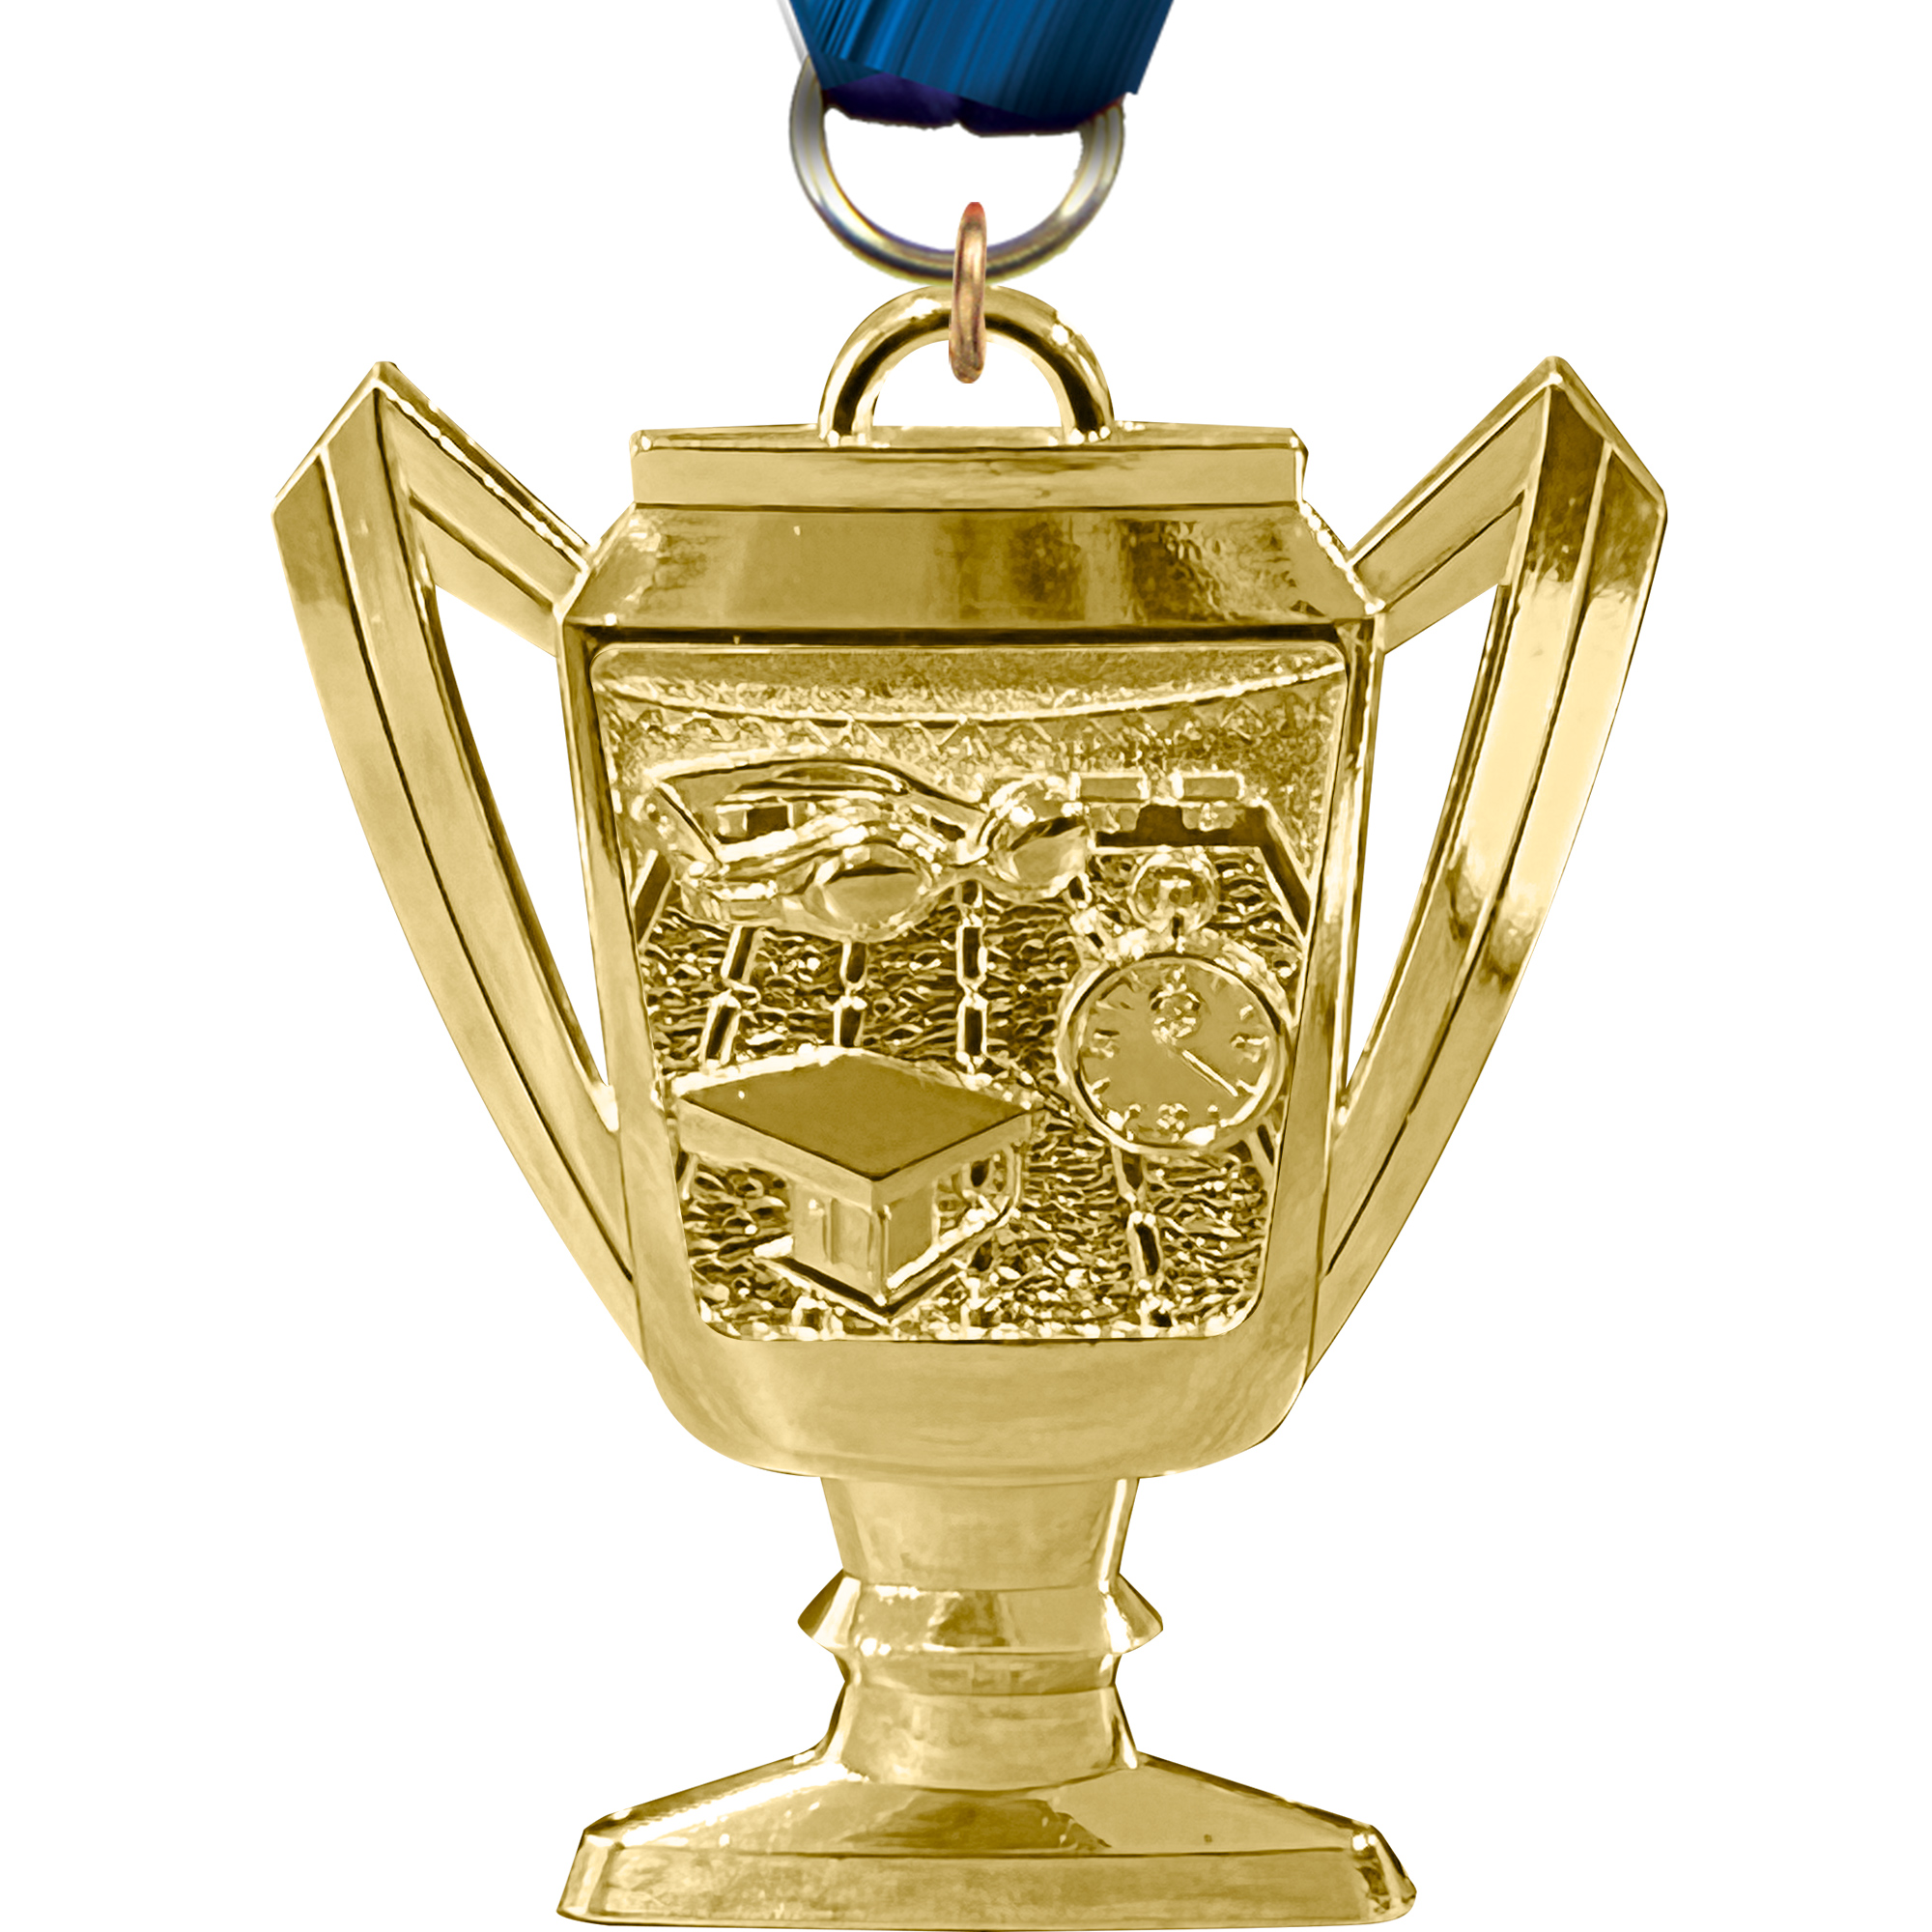 Swimming Bright Gold Trophy Cup Medal